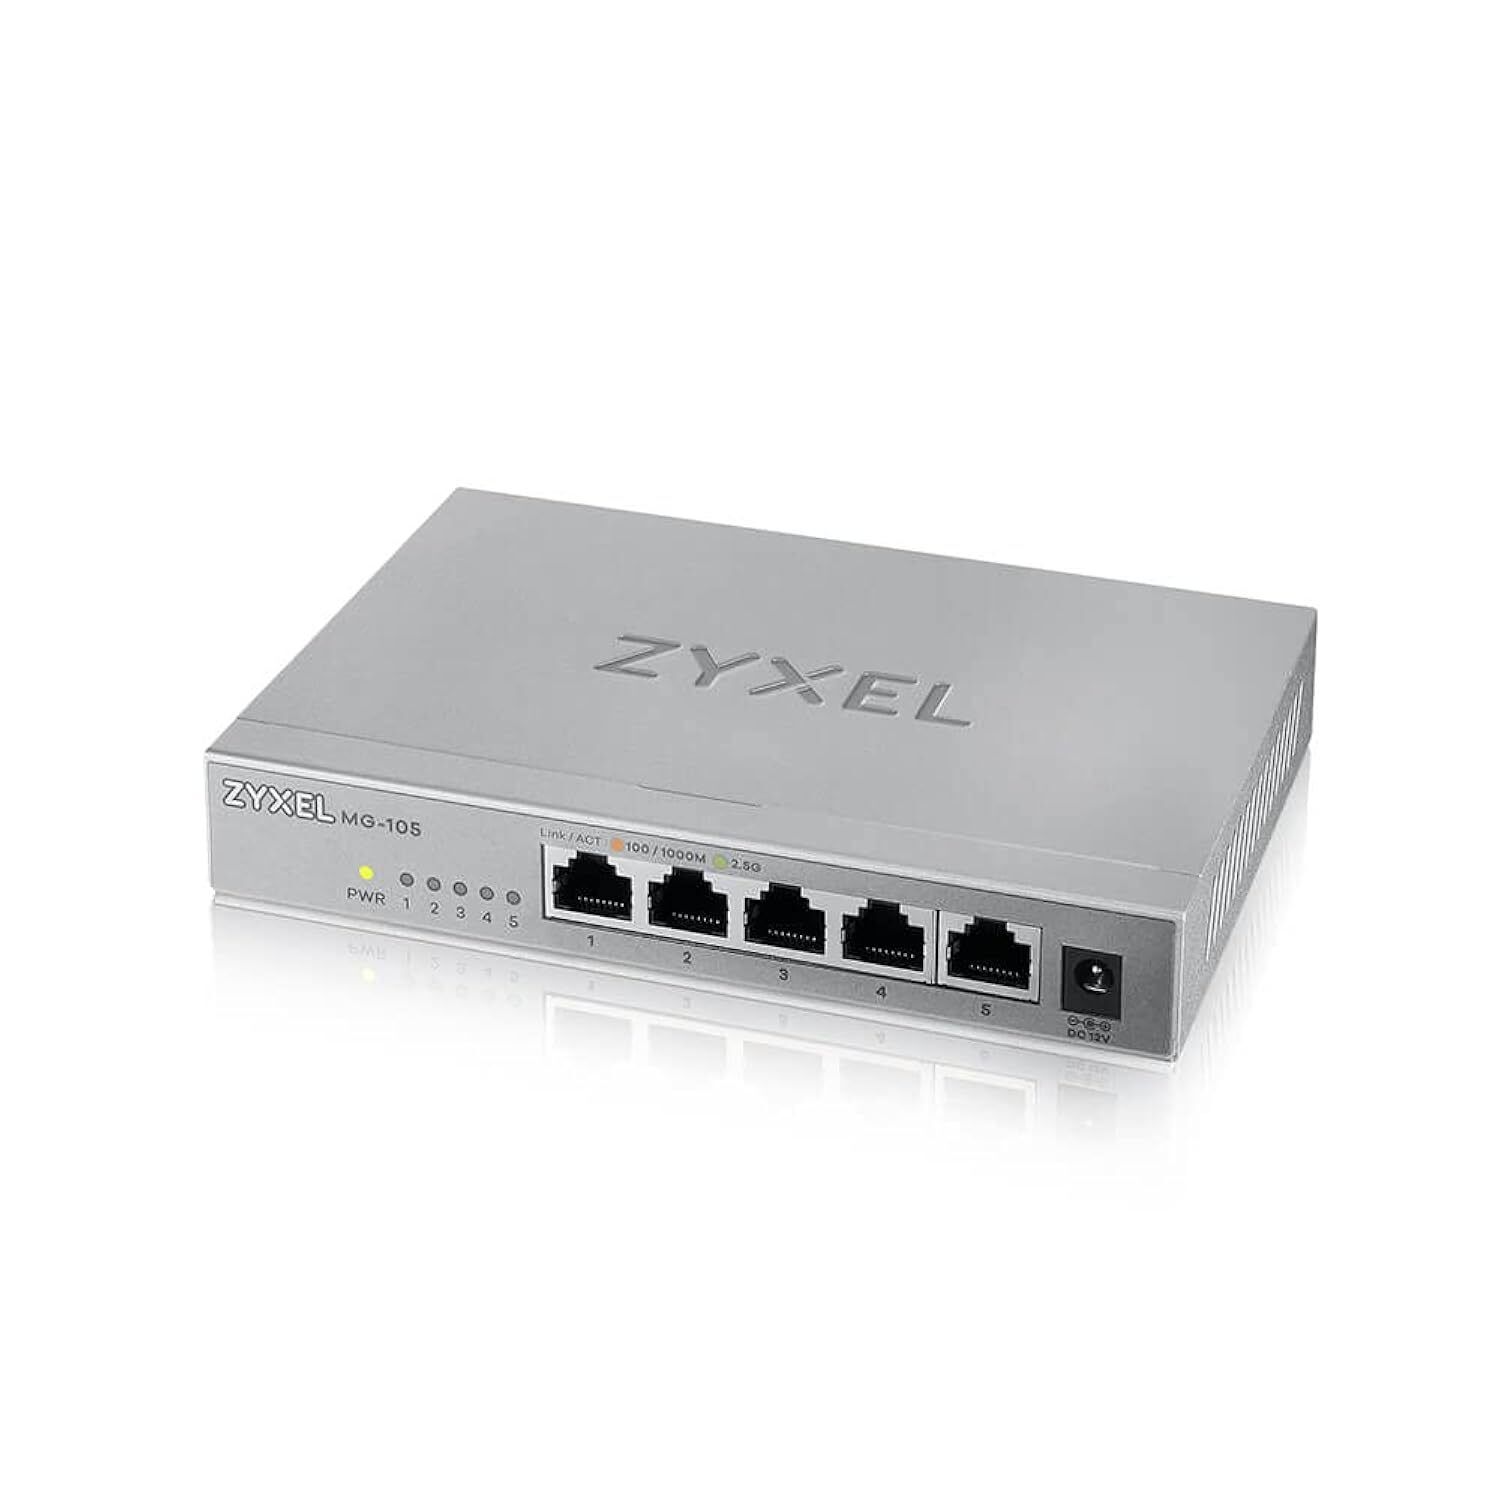 Zyxel 5-Port 2.5G Multi-Gigabit Unmanaged Switch for Home Entertainment or SOH